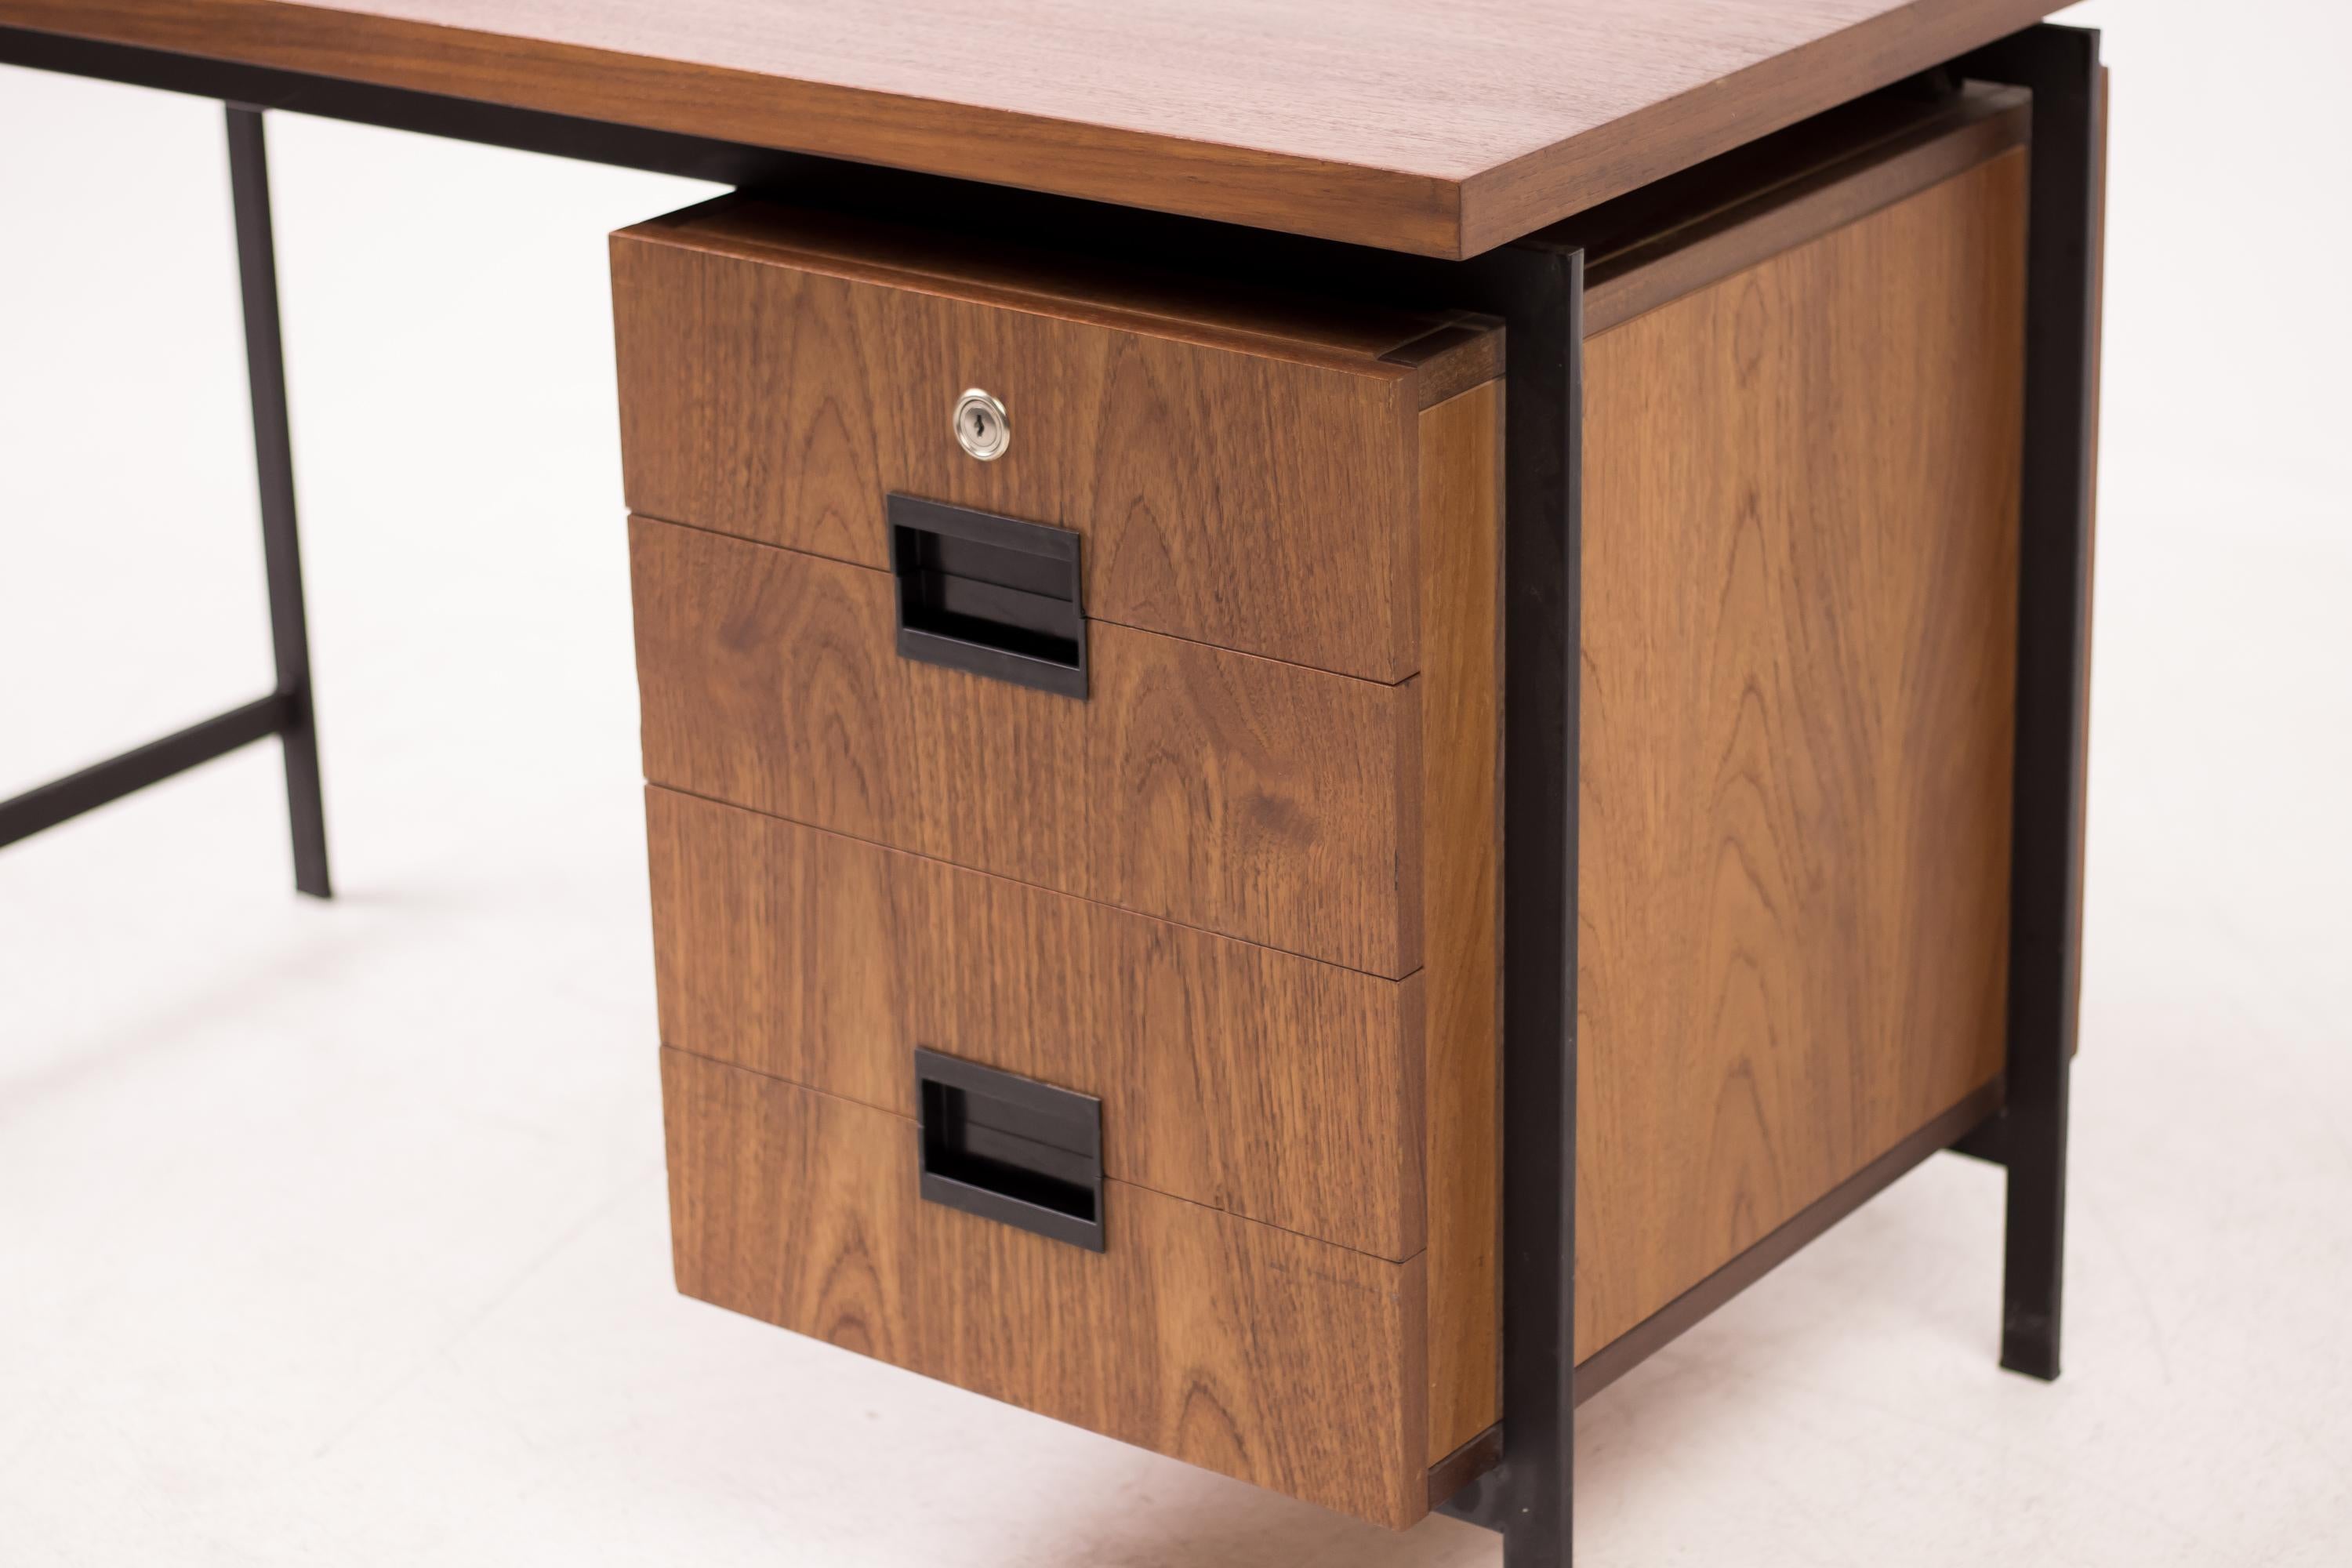 Elegant EU-01 desk from U+N series in teak, designed by Cees Braakman for Pastoe in 1958. 
Drawers with the renowned birch bent plywood interior. 
The desk is marked with the Pastoe silver label and the key is present.